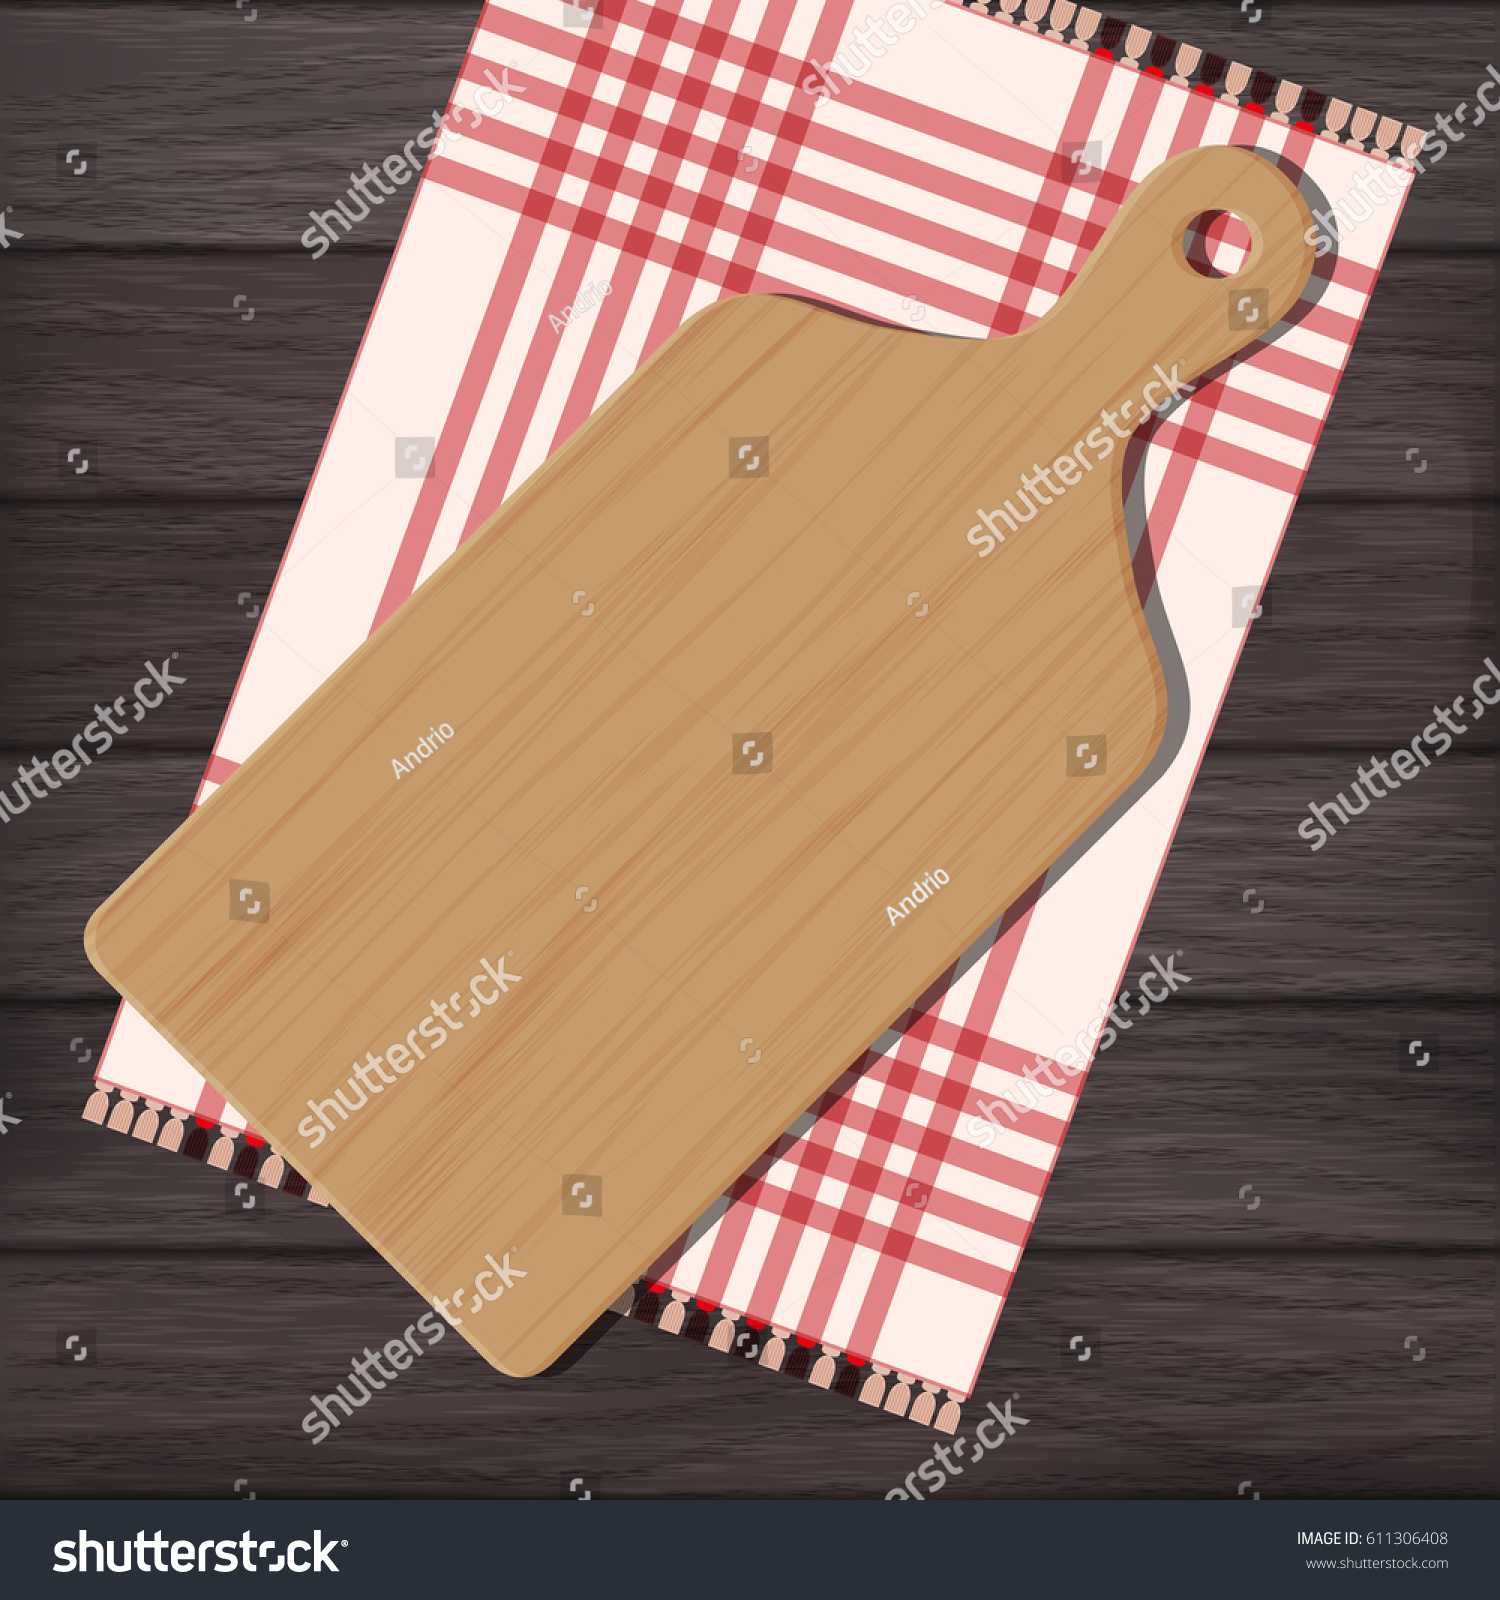 SVG of Cutting board with gingham cloth on wooden background. Vector color illustration clipart svg